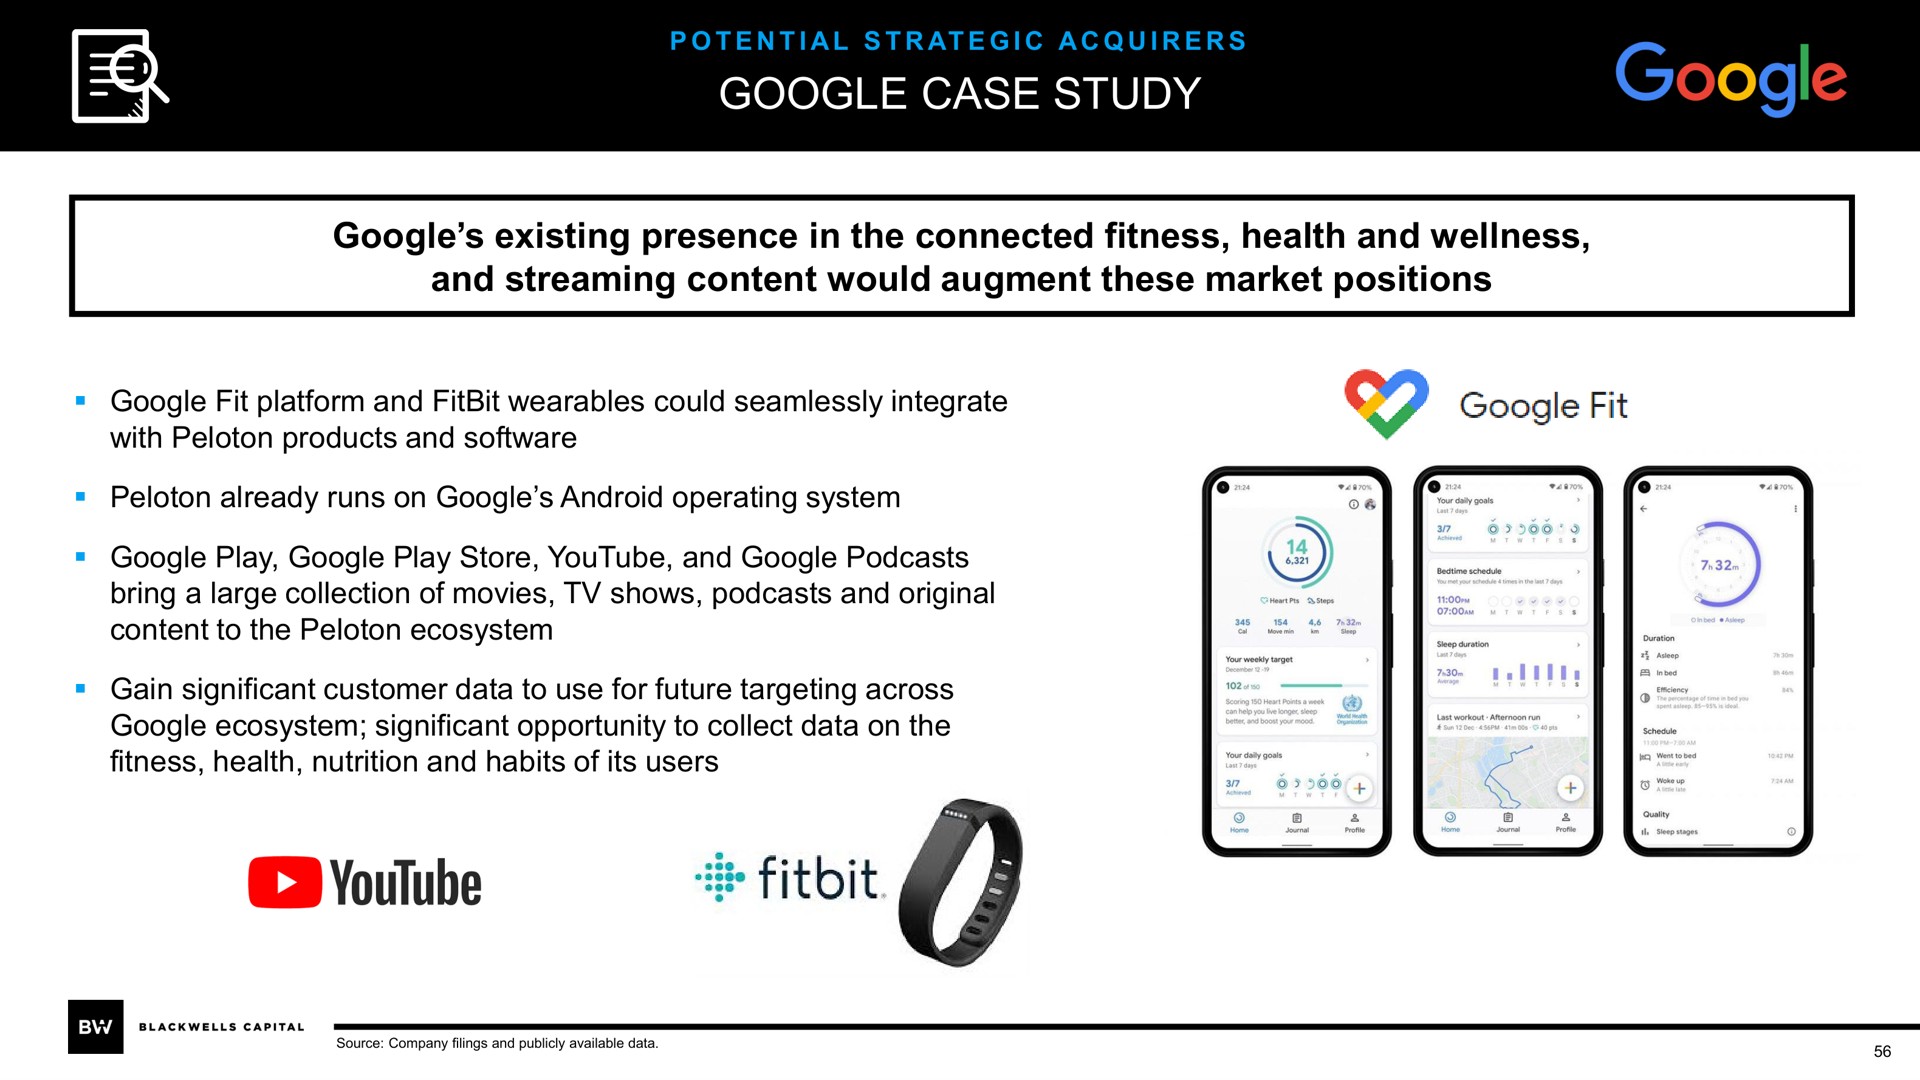 case study existing presence in the connected fitness health and wellness and streaming content would augment these market positions | Blackwells Capital